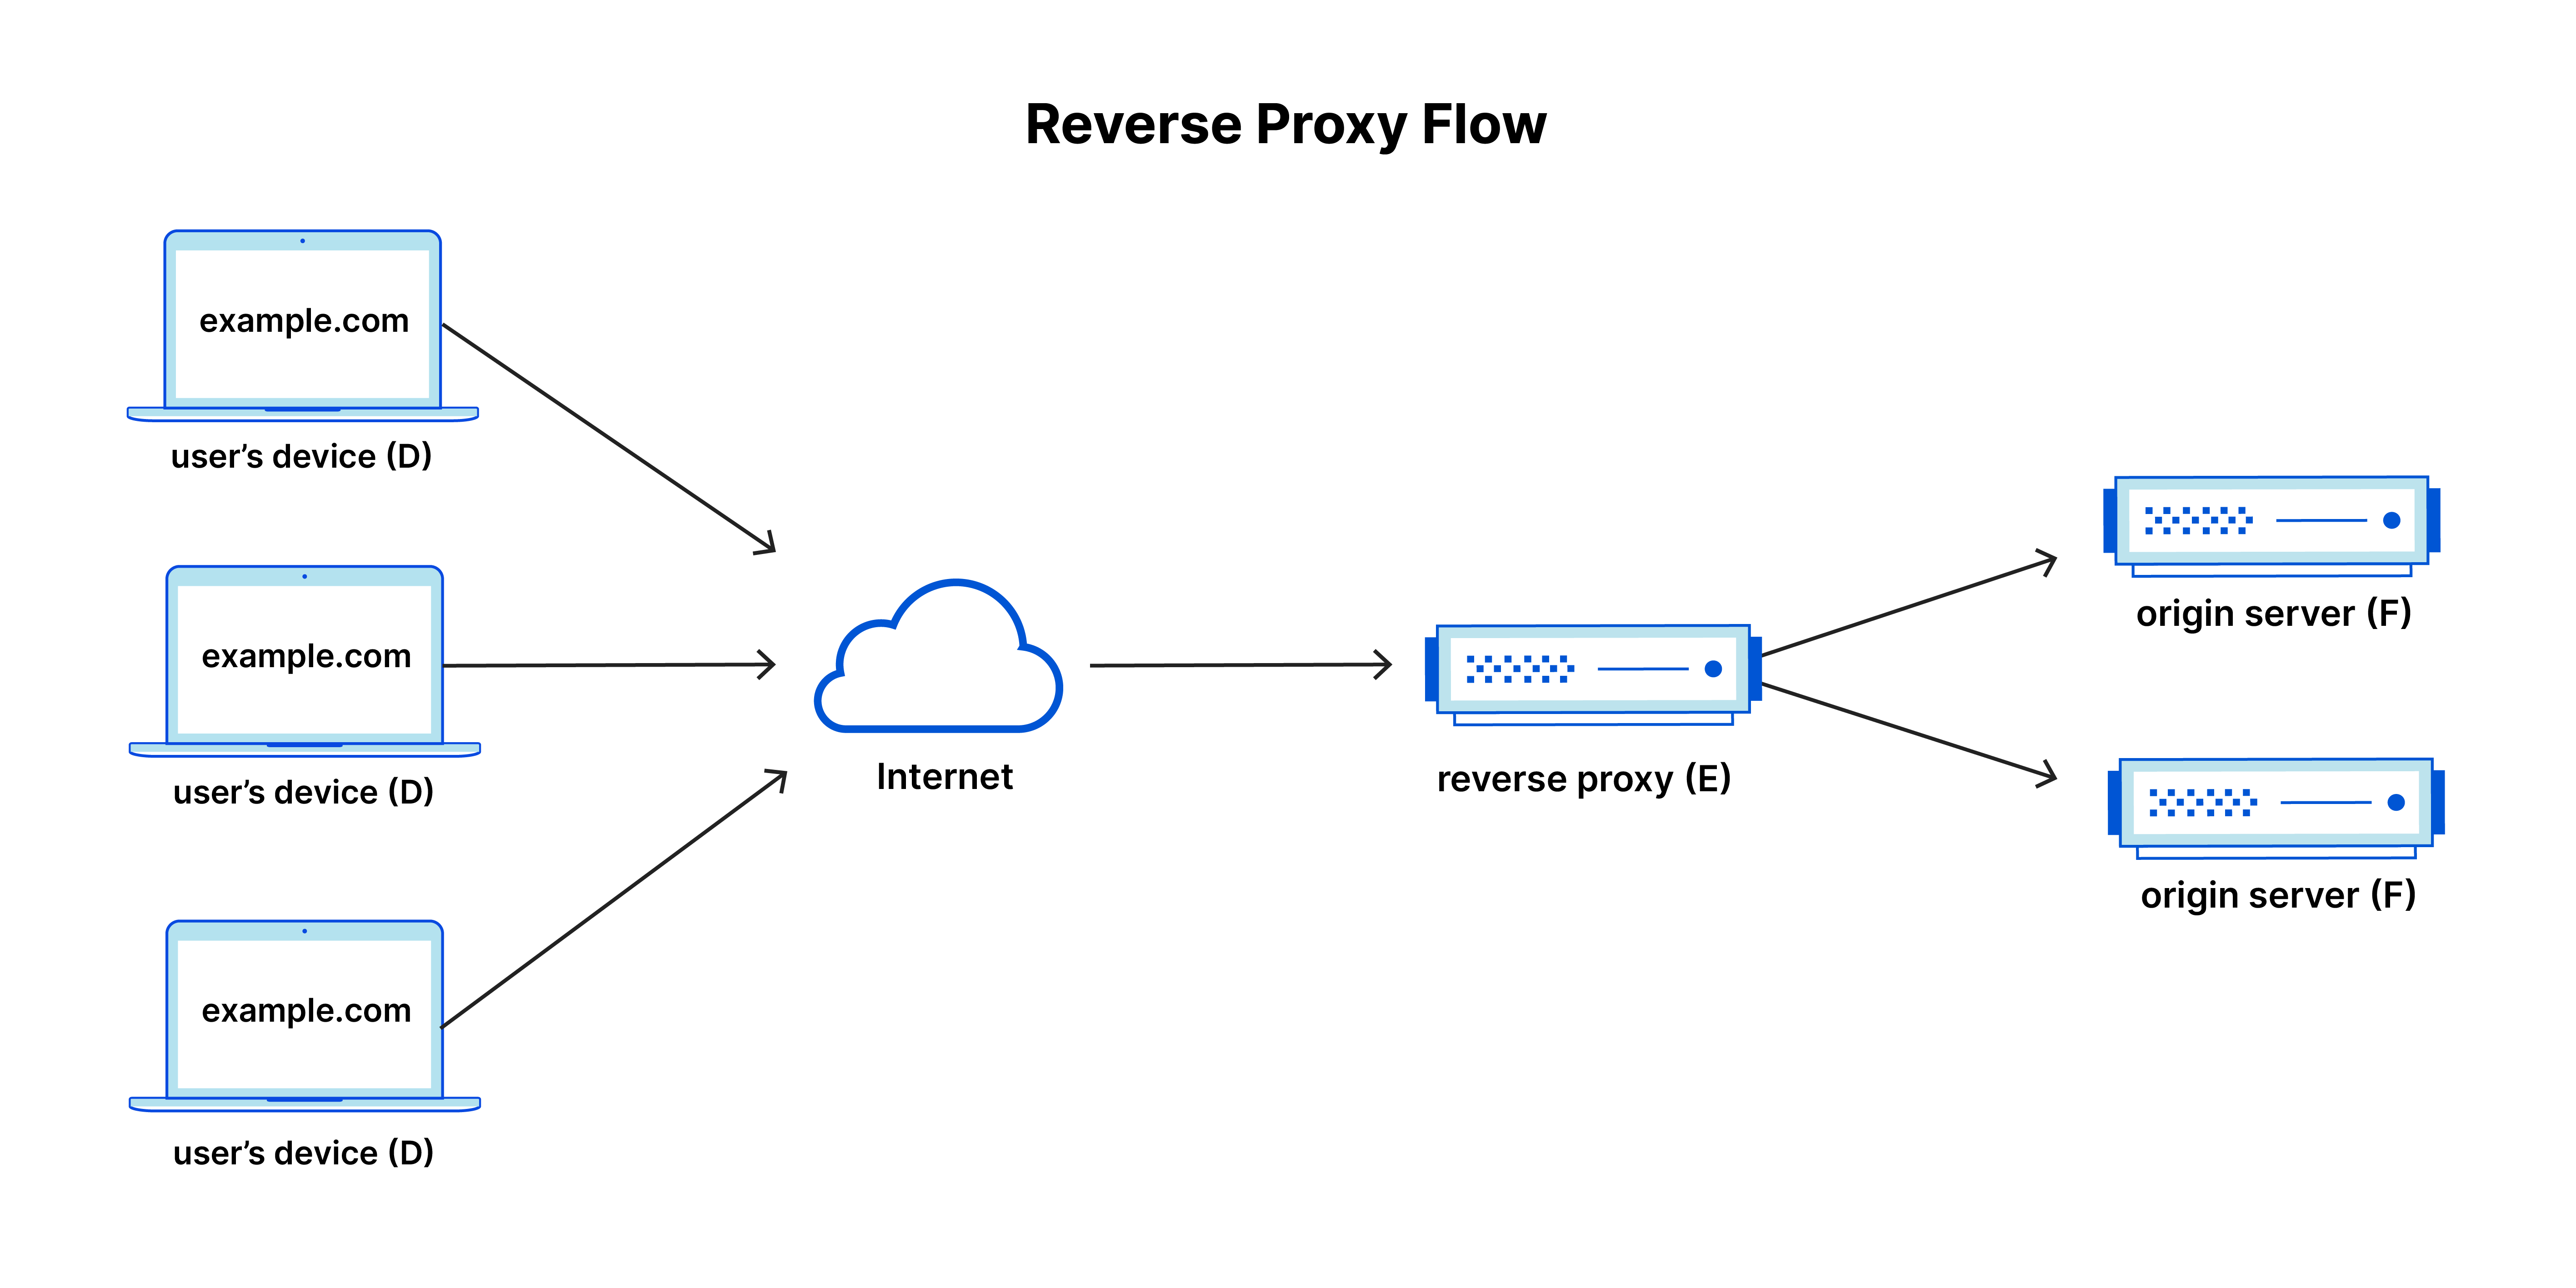 Rekvisitter nuttet kuvert What is a reverse proxy? | Proxy servers explained | Cloudflare